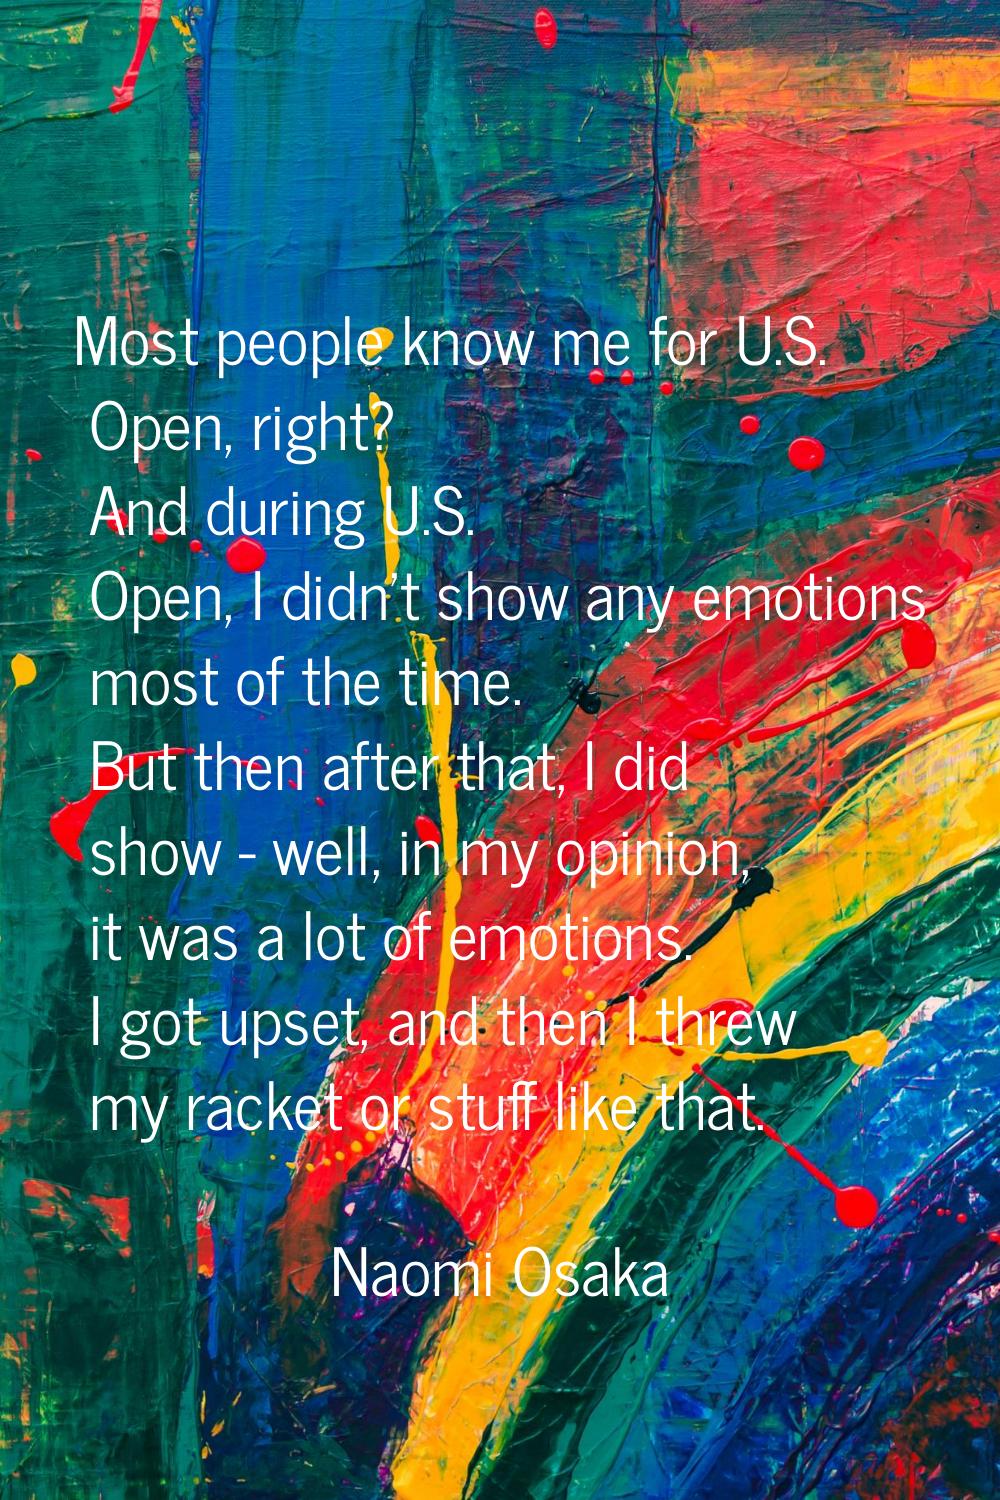 Most people know me for U.S. Open, right? And during U.S. Open, I didn't show any emotions most of 